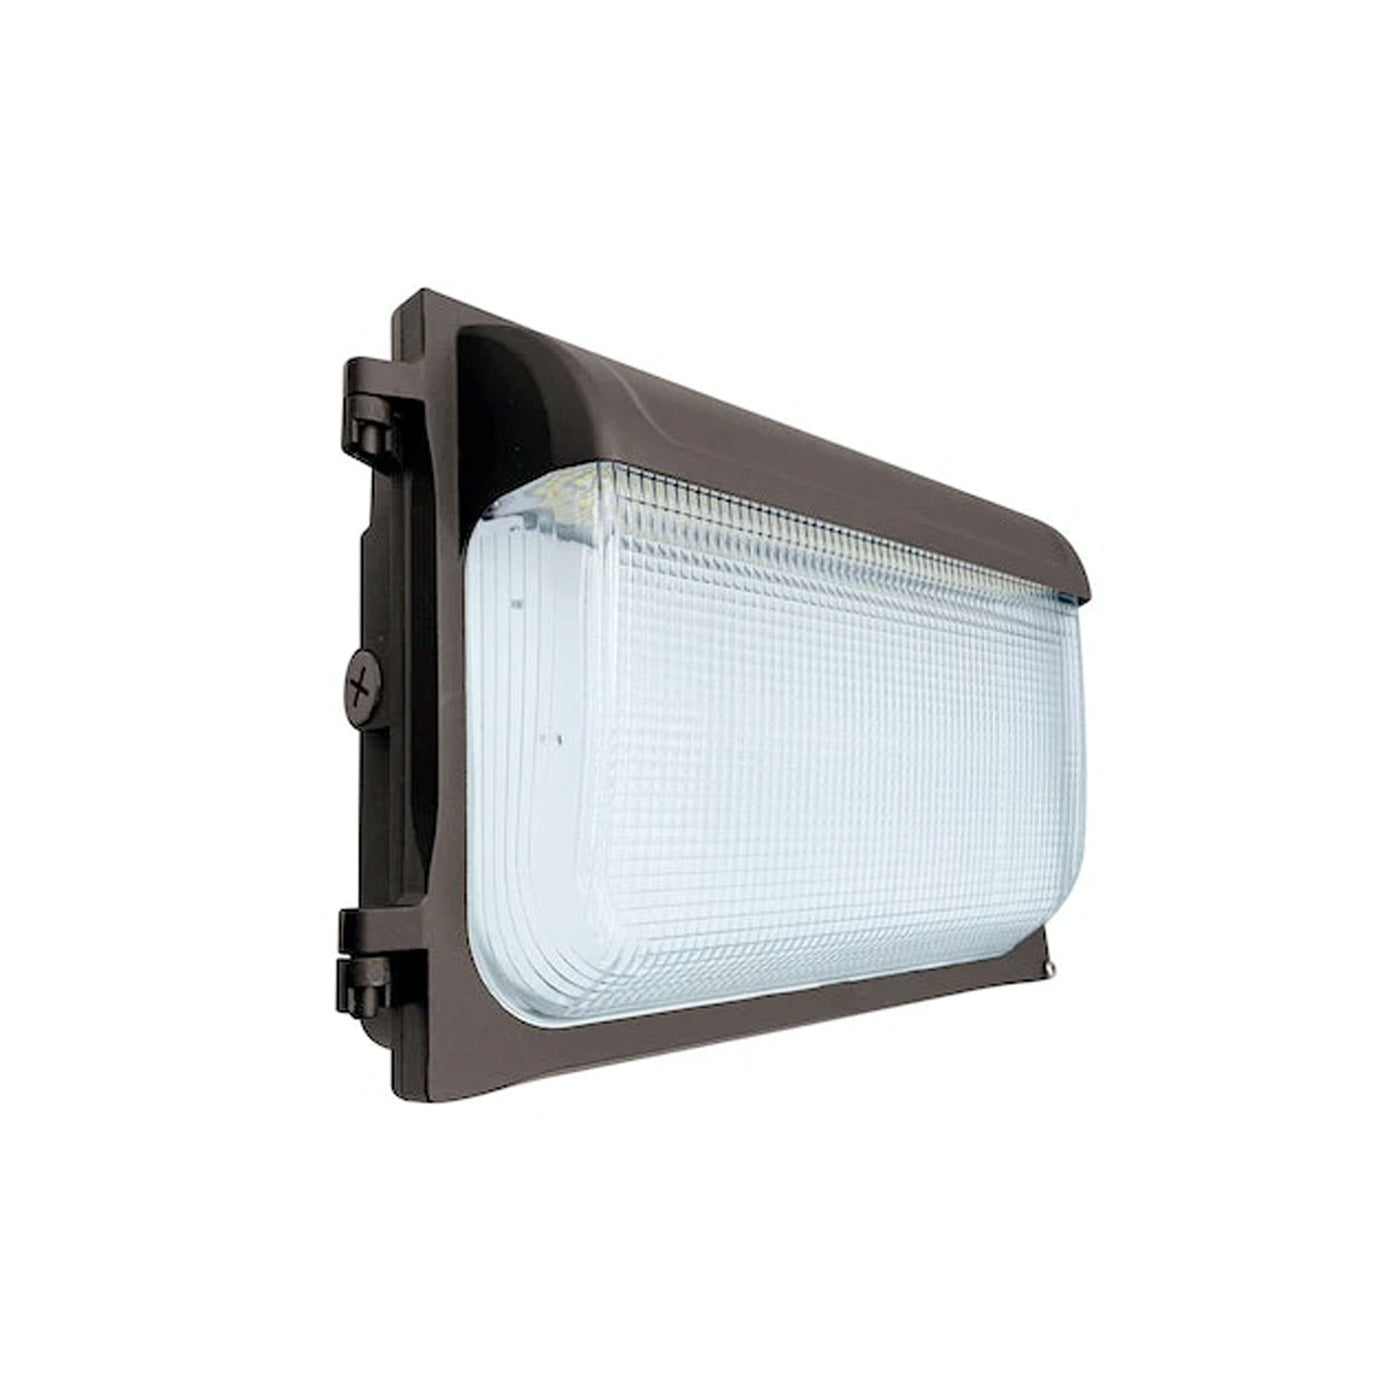 SL-Line LED Wall Pack with Photocell, 7,800 Lumens, 30W/40W/60W Selectable, 120-277V, CCT Selectable 3000K/4000K/5000K, Bronze Finish